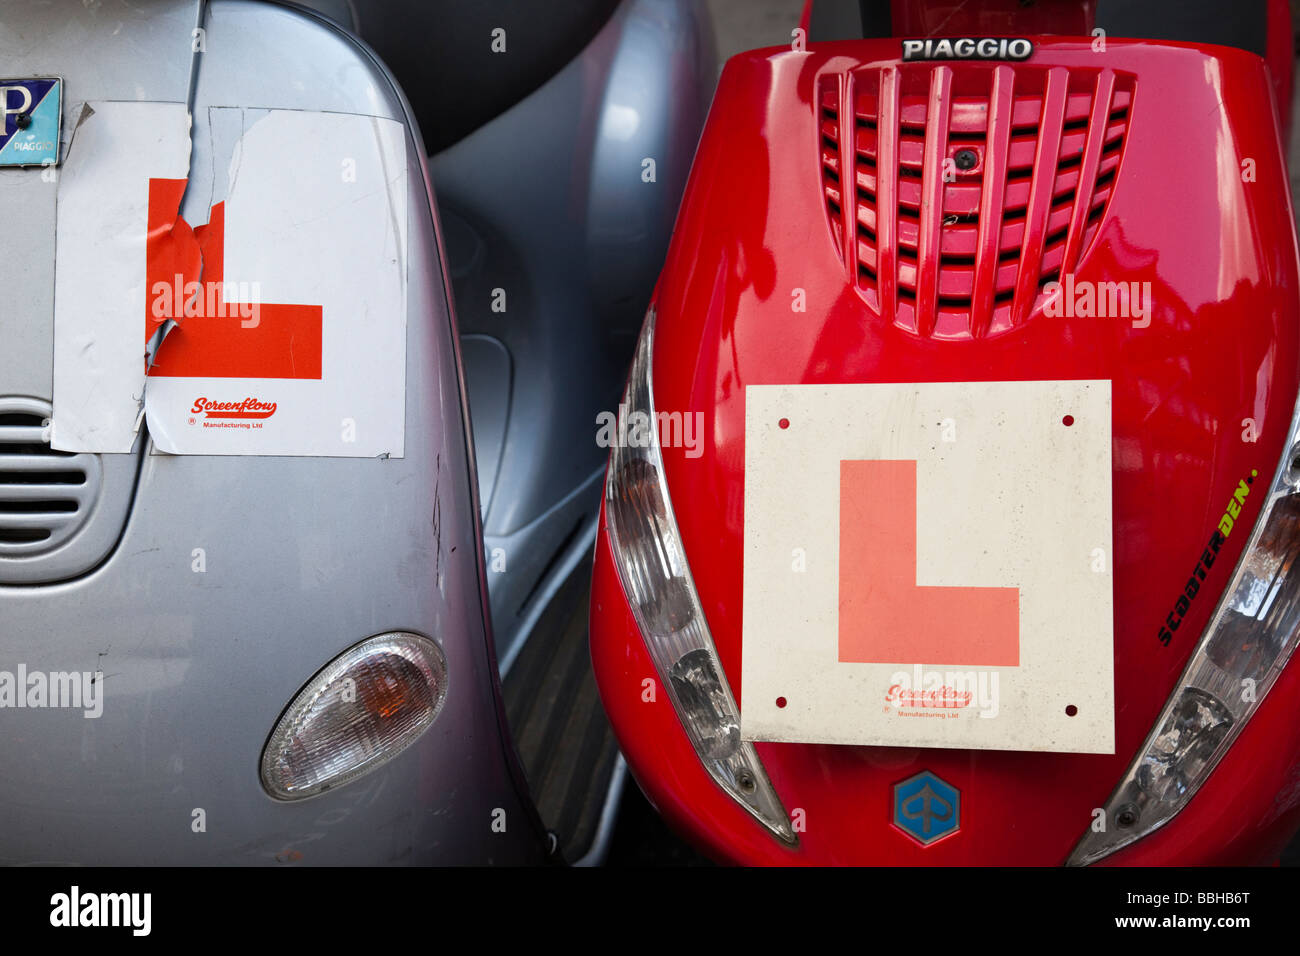 L plates on scooters Stock Photo